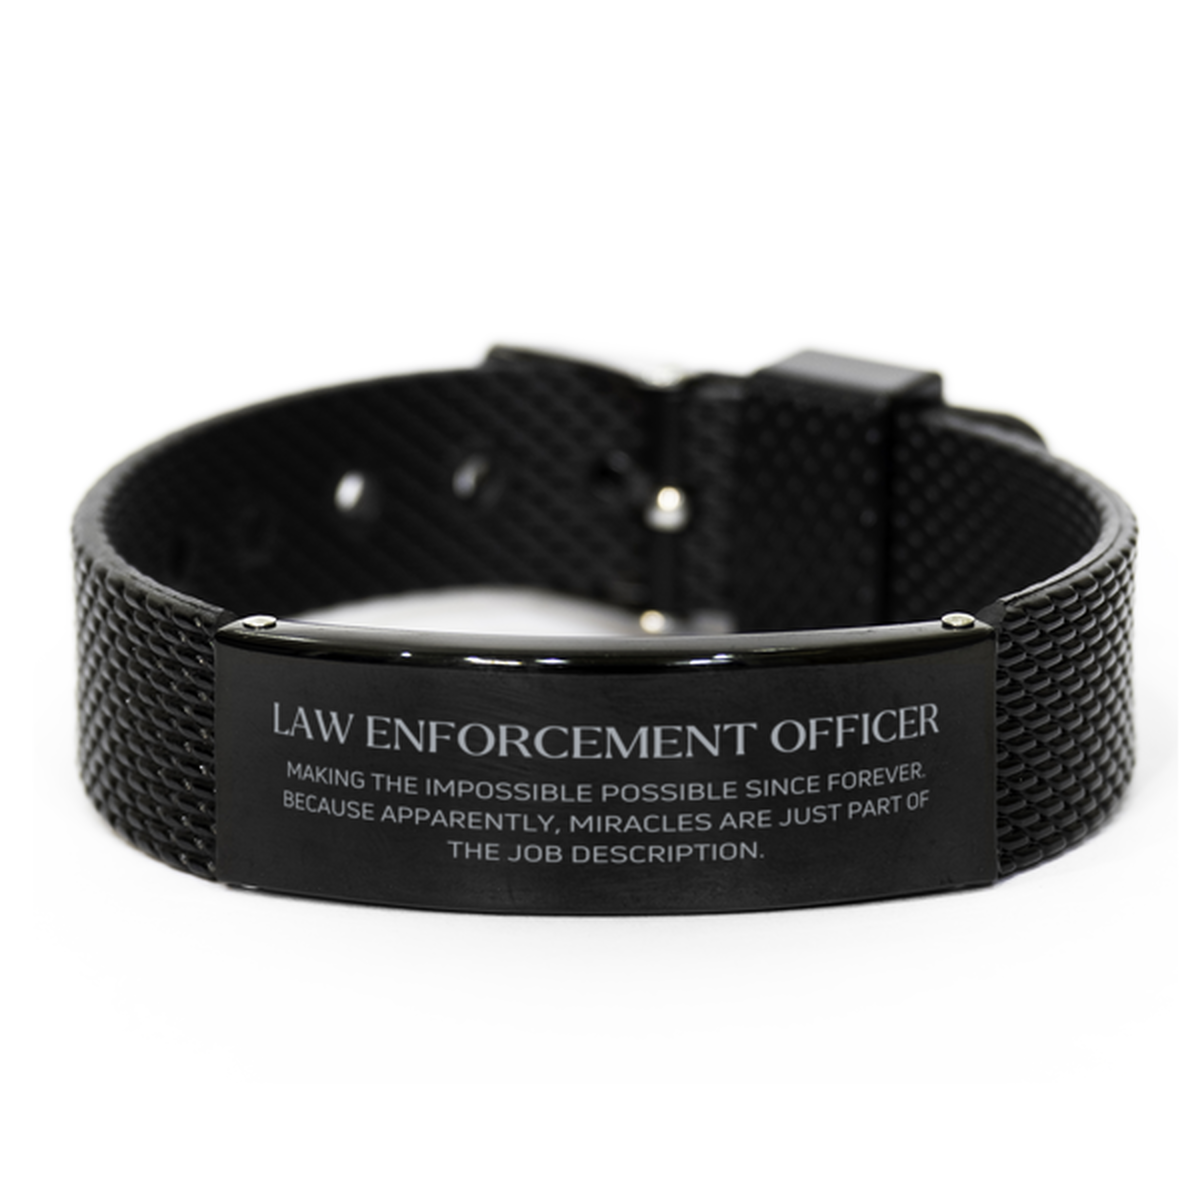 Funny Law Enforcement Officer Gifts, Miracles are just part of the job description, Inspirational Birthday Black Shark Mesh Bracelet For Law Enforcement Officer, Men, Women, Coworkers, Friends, Boss